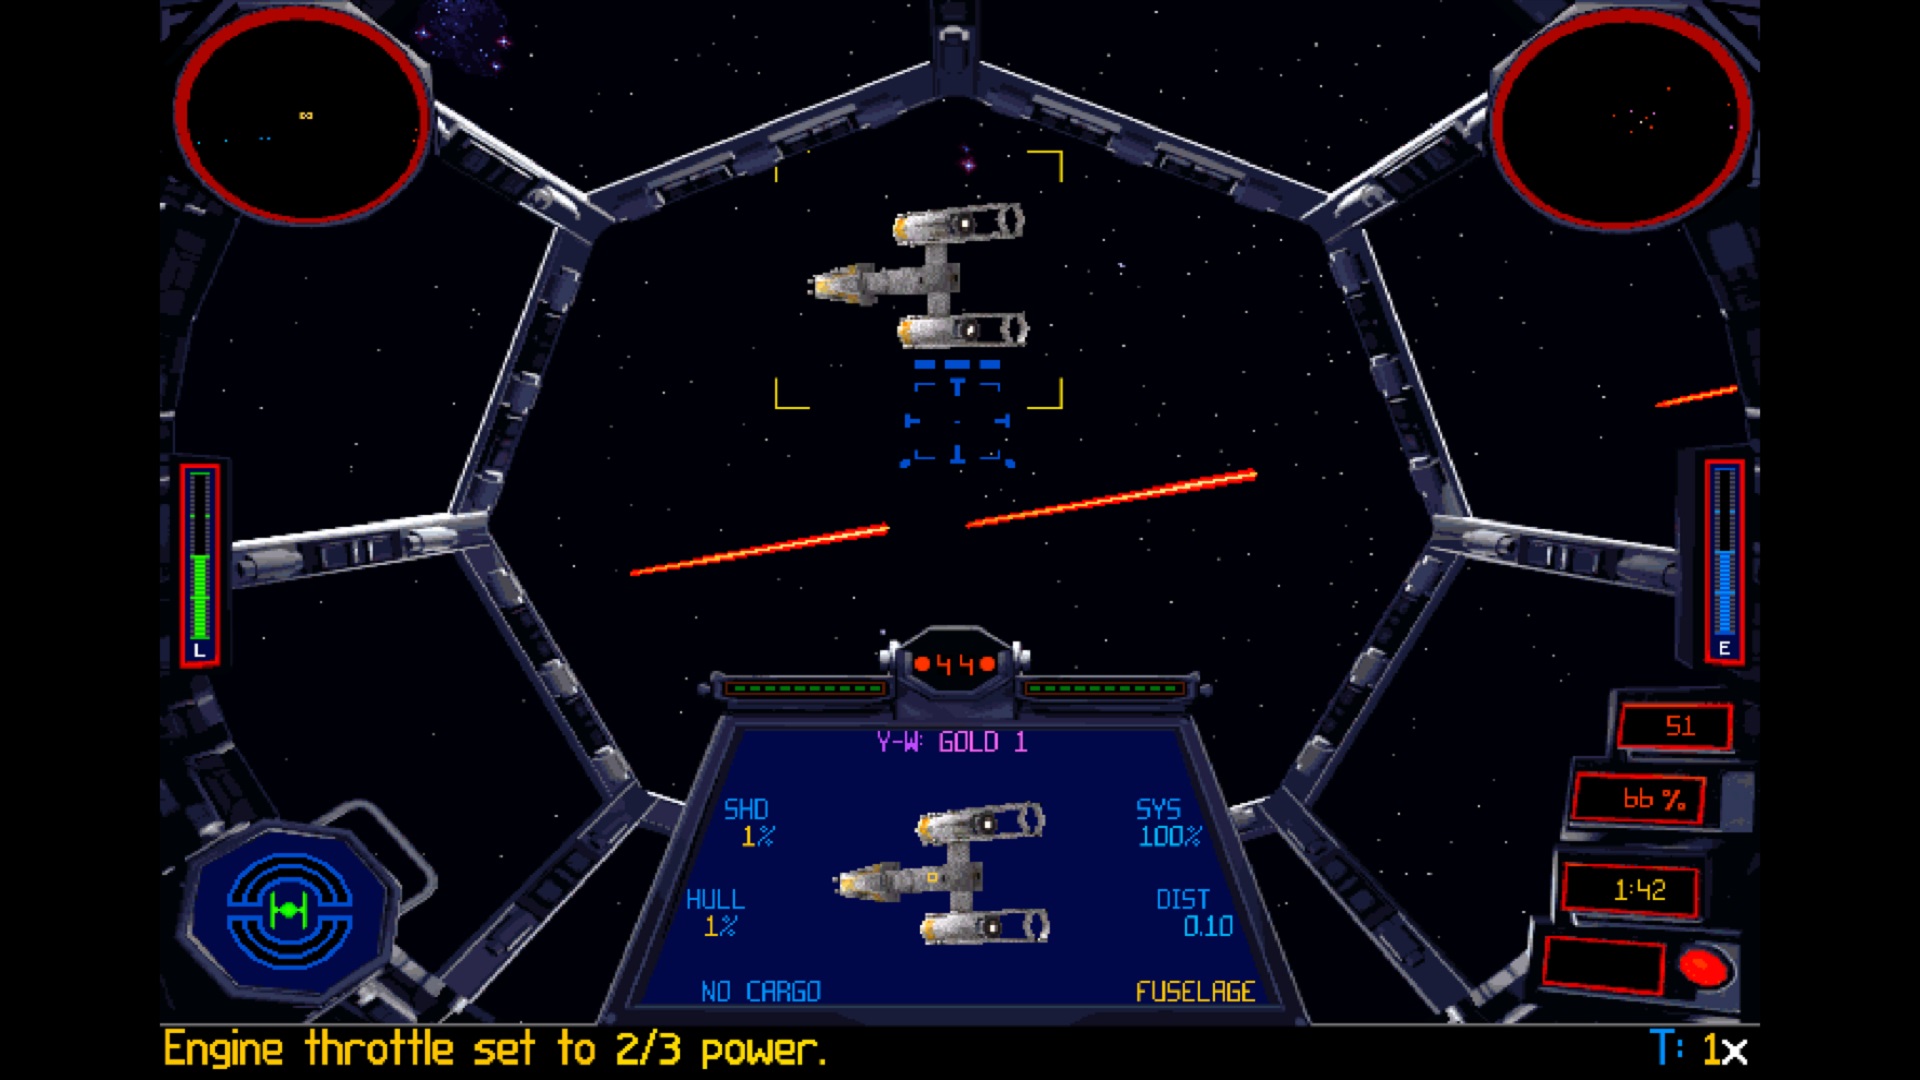 When games like X-Wing were released on the PC, Dave knew the heydays of the 16-bit computers were over.